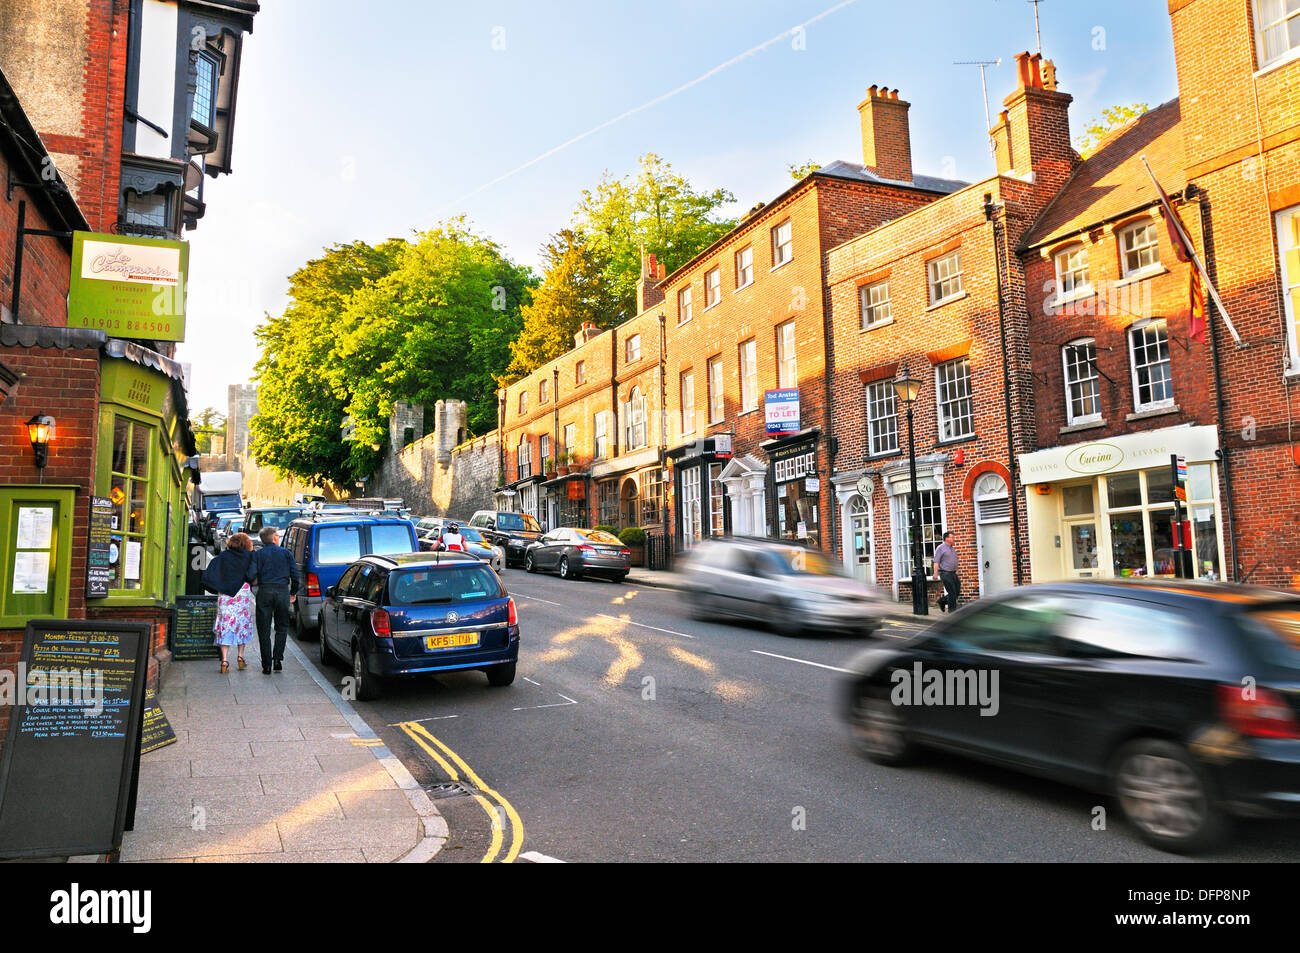 Arundel town, West Sussex, England, UK Stock Photo